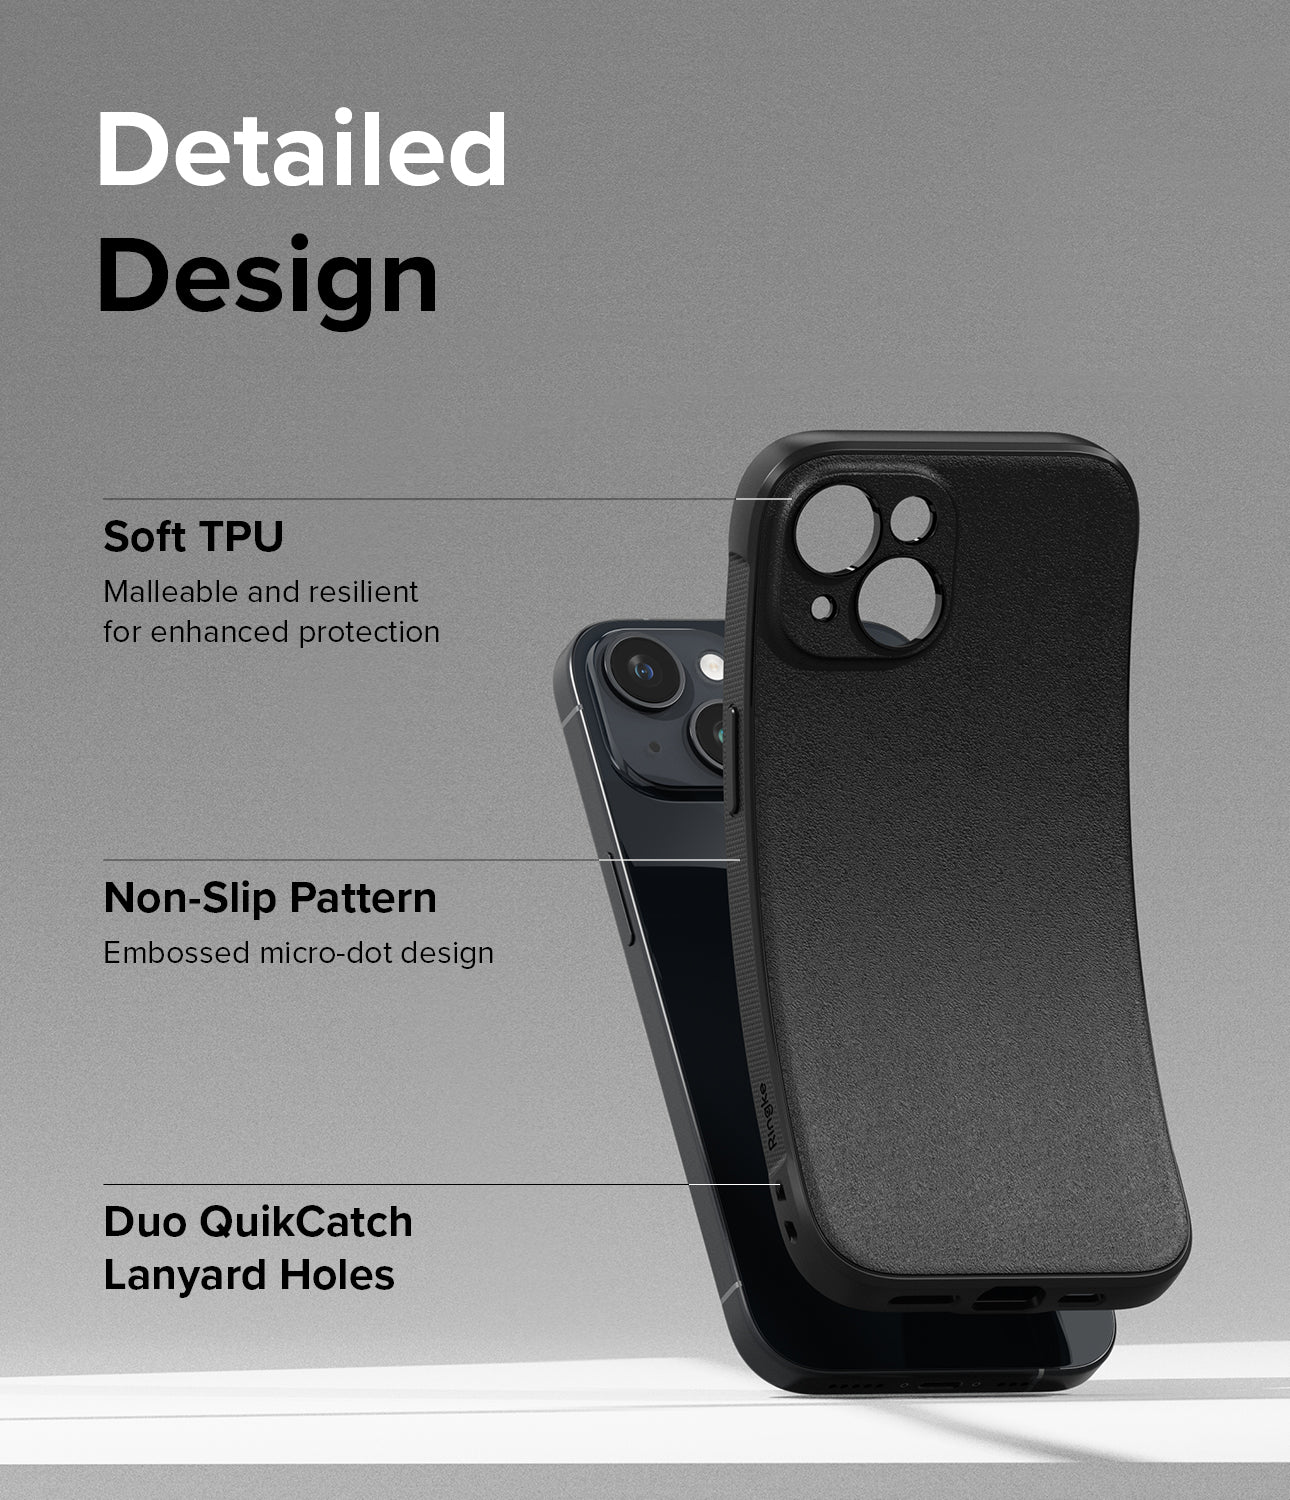 iPhone 15 Plus Case | Onyx - Detailed Design. Soft-TPU. Malleable and resilient for enhanced protection. Non-Slip Pattern Embossed micro-dot design. Duo QuikCatch Lanyard Holes.